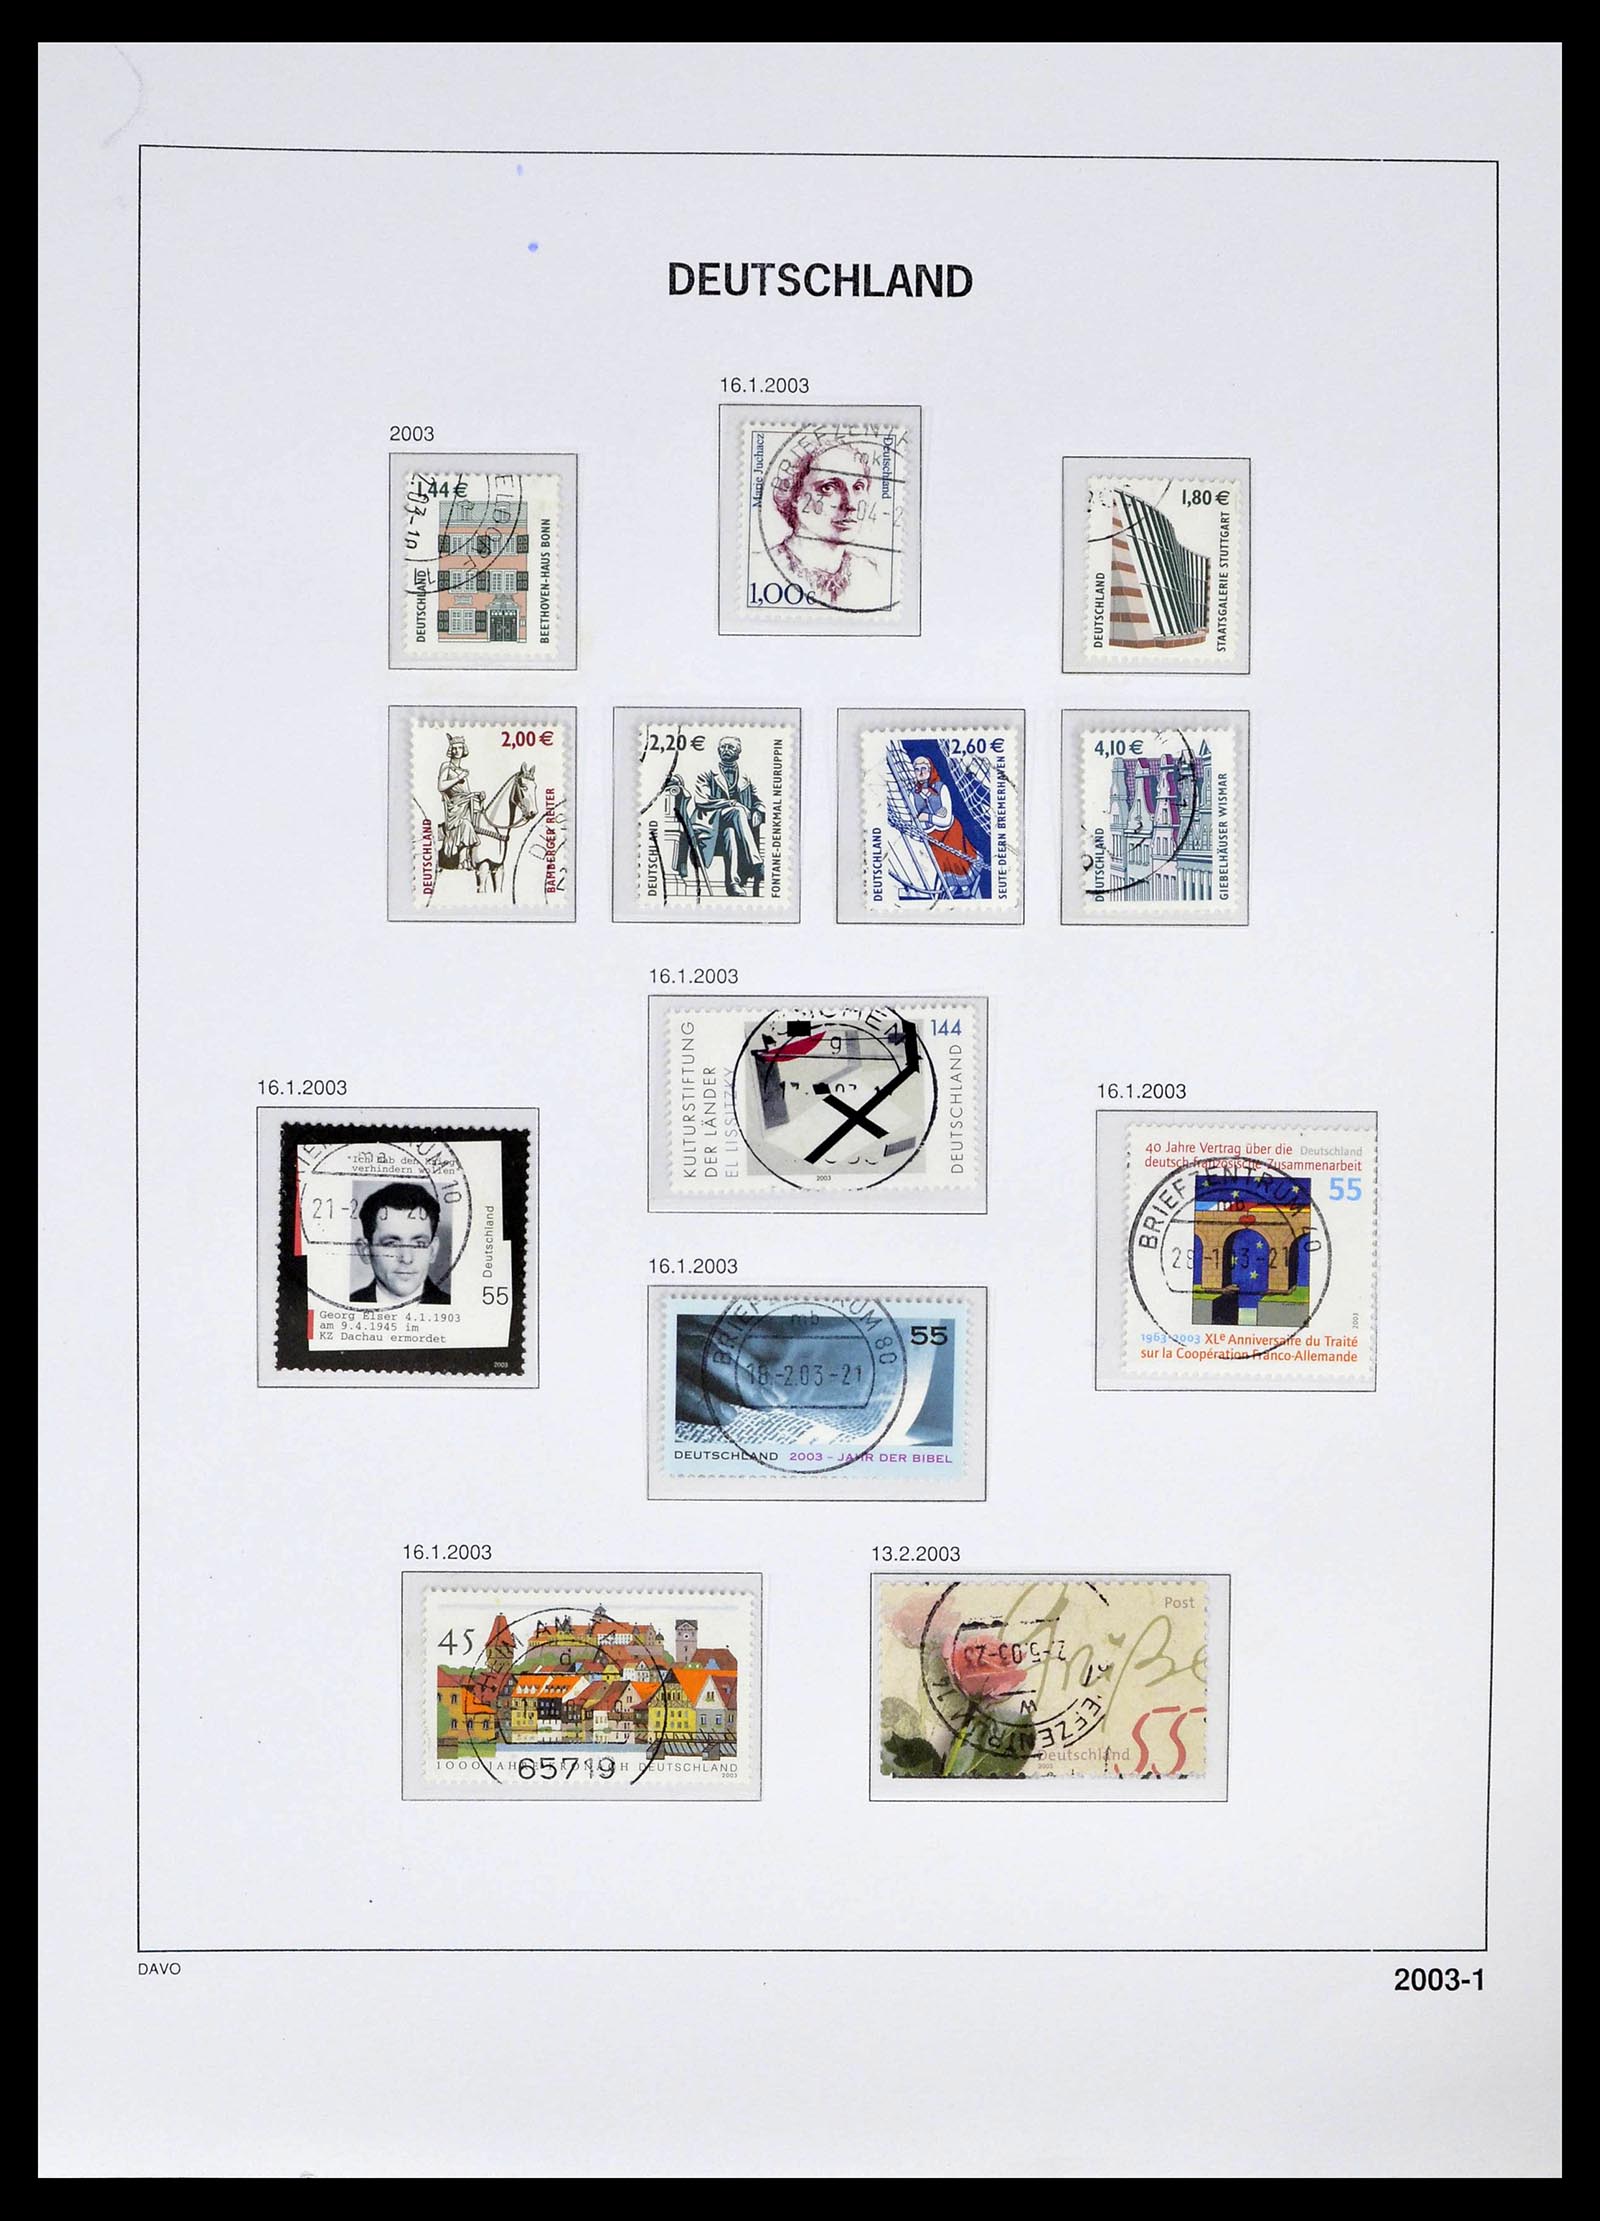 39326 0222 - Stamp collection 39326 Bundespost 1949-2003.